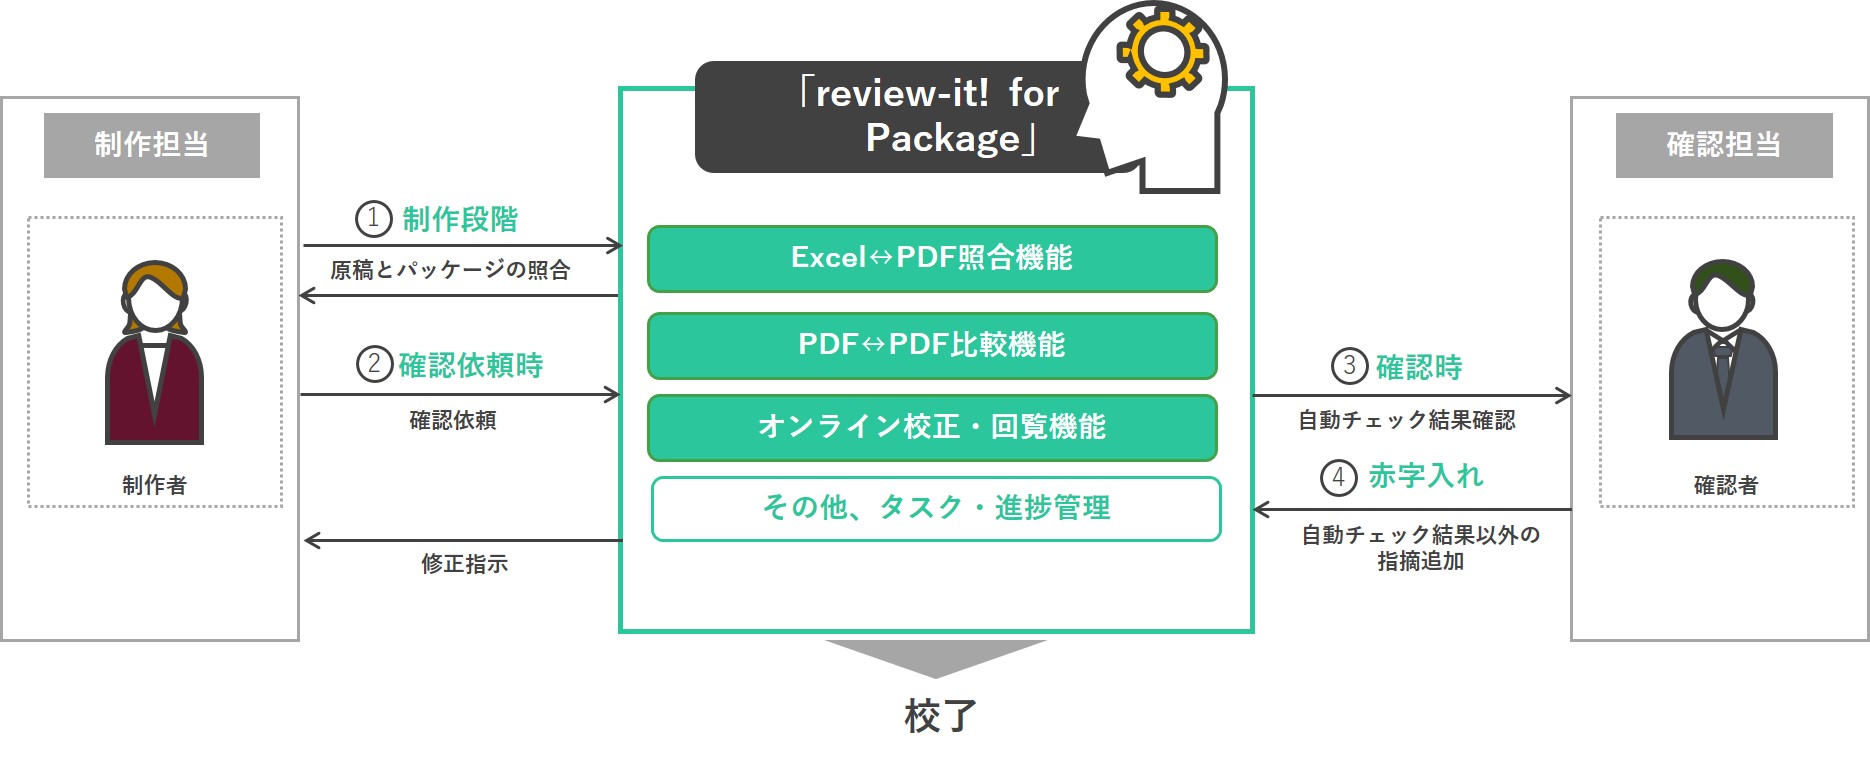 「review-it! for Package」活用イメージ   TOPPAN INC.